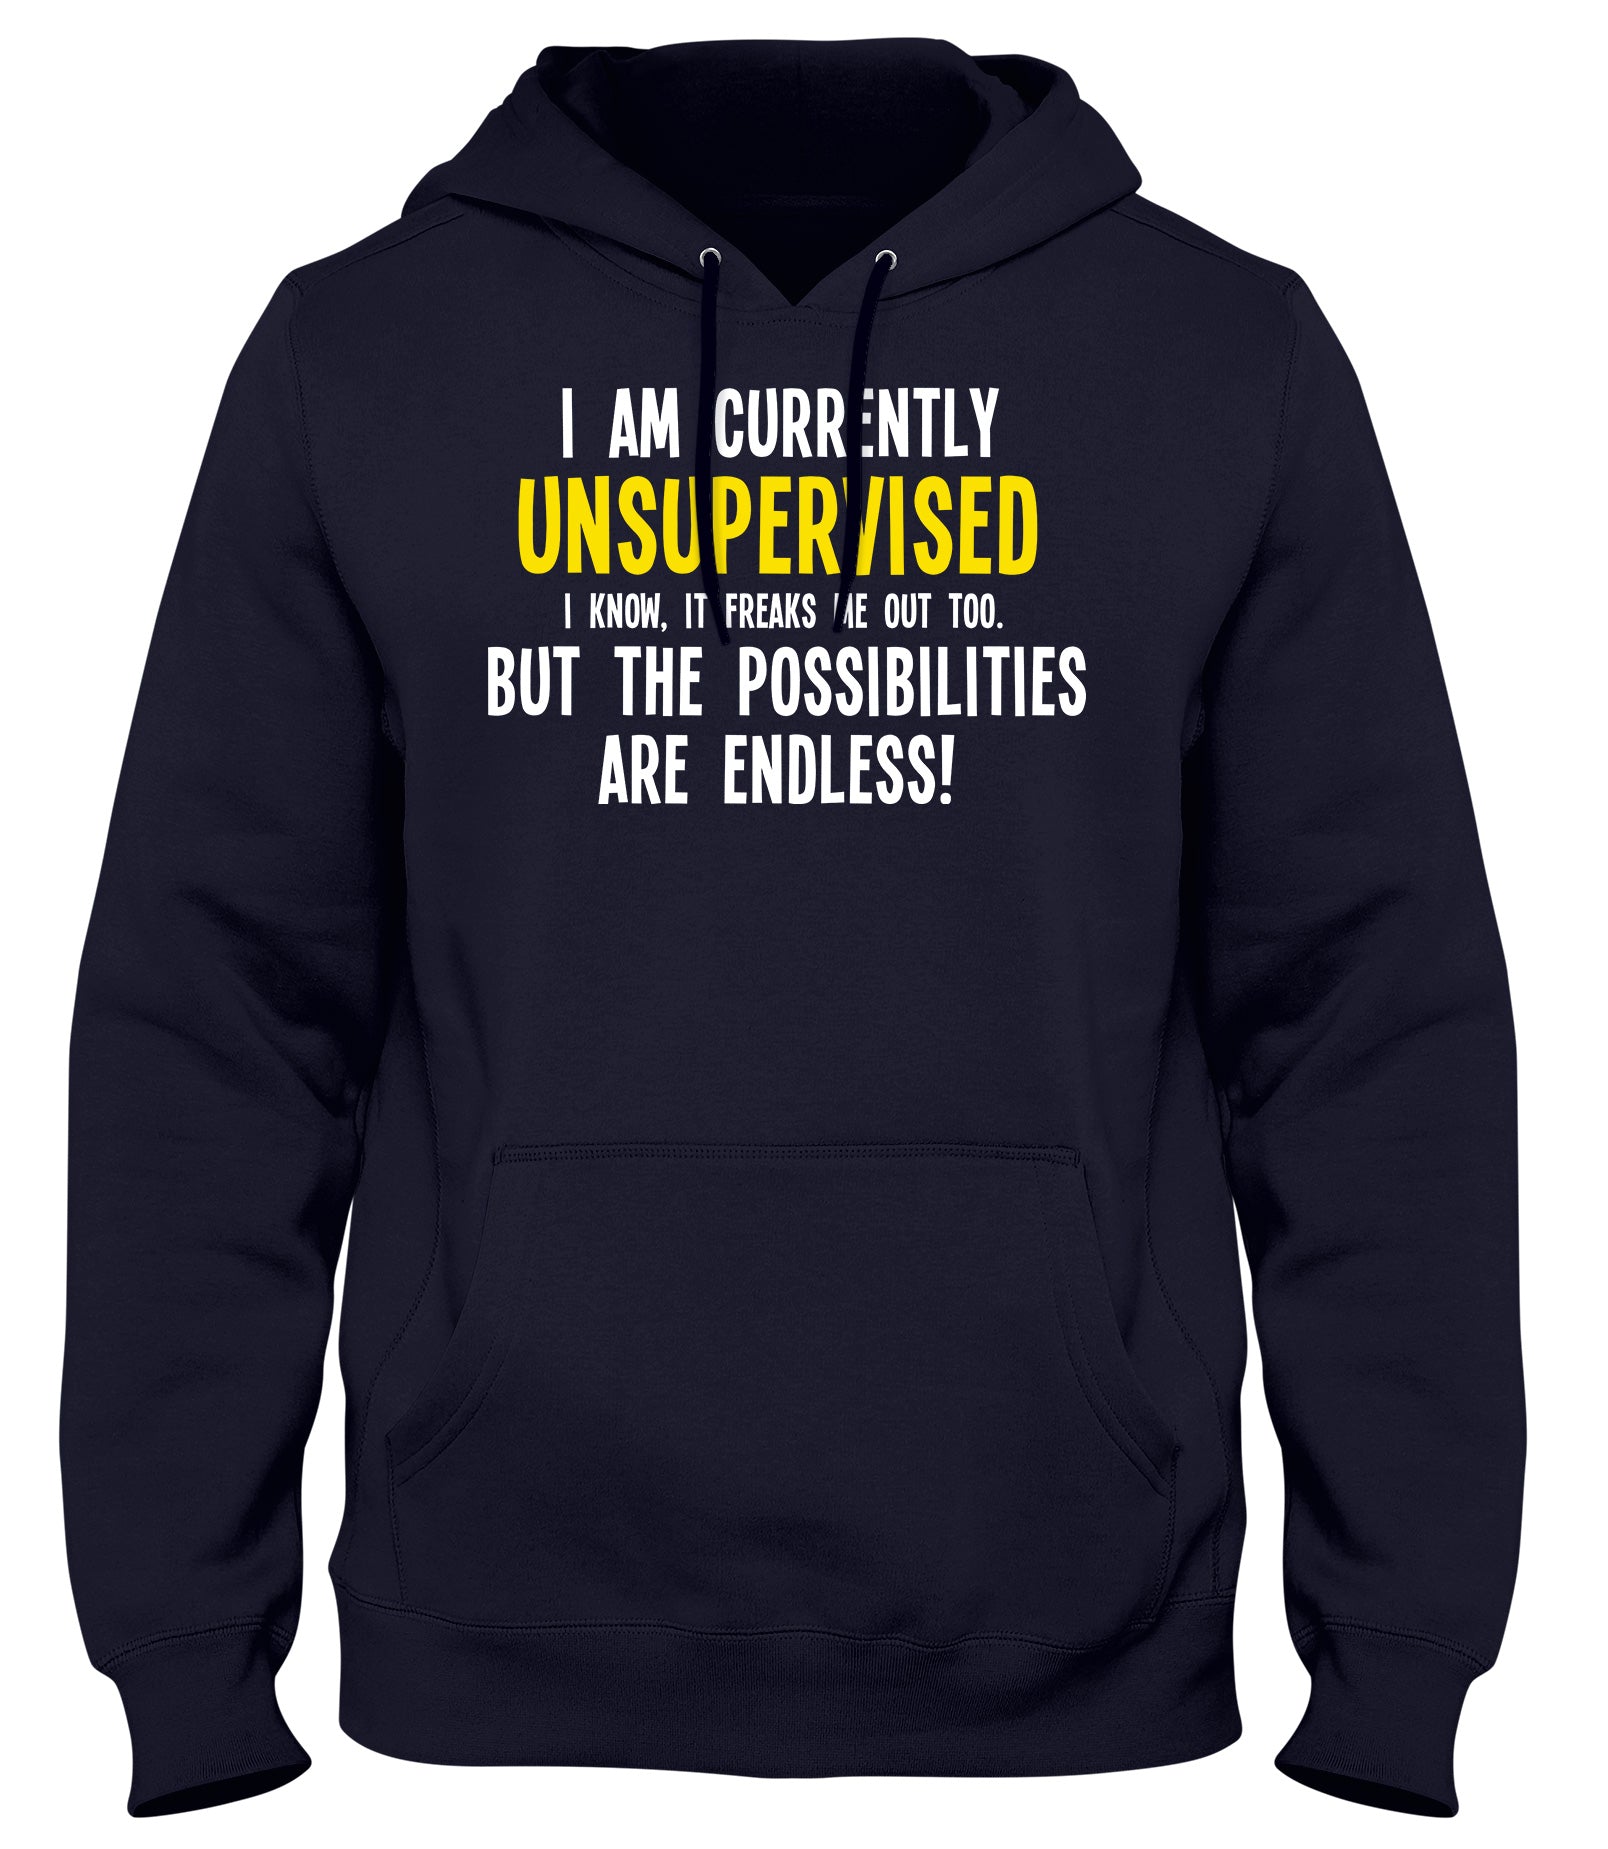 I AM CURRENTLY UNSUPERVISED THE POSSIBILITIES ARE ENDLESS! MENS WOMENS LADIES UNISEX FUNNY SLOGAN HOODIE